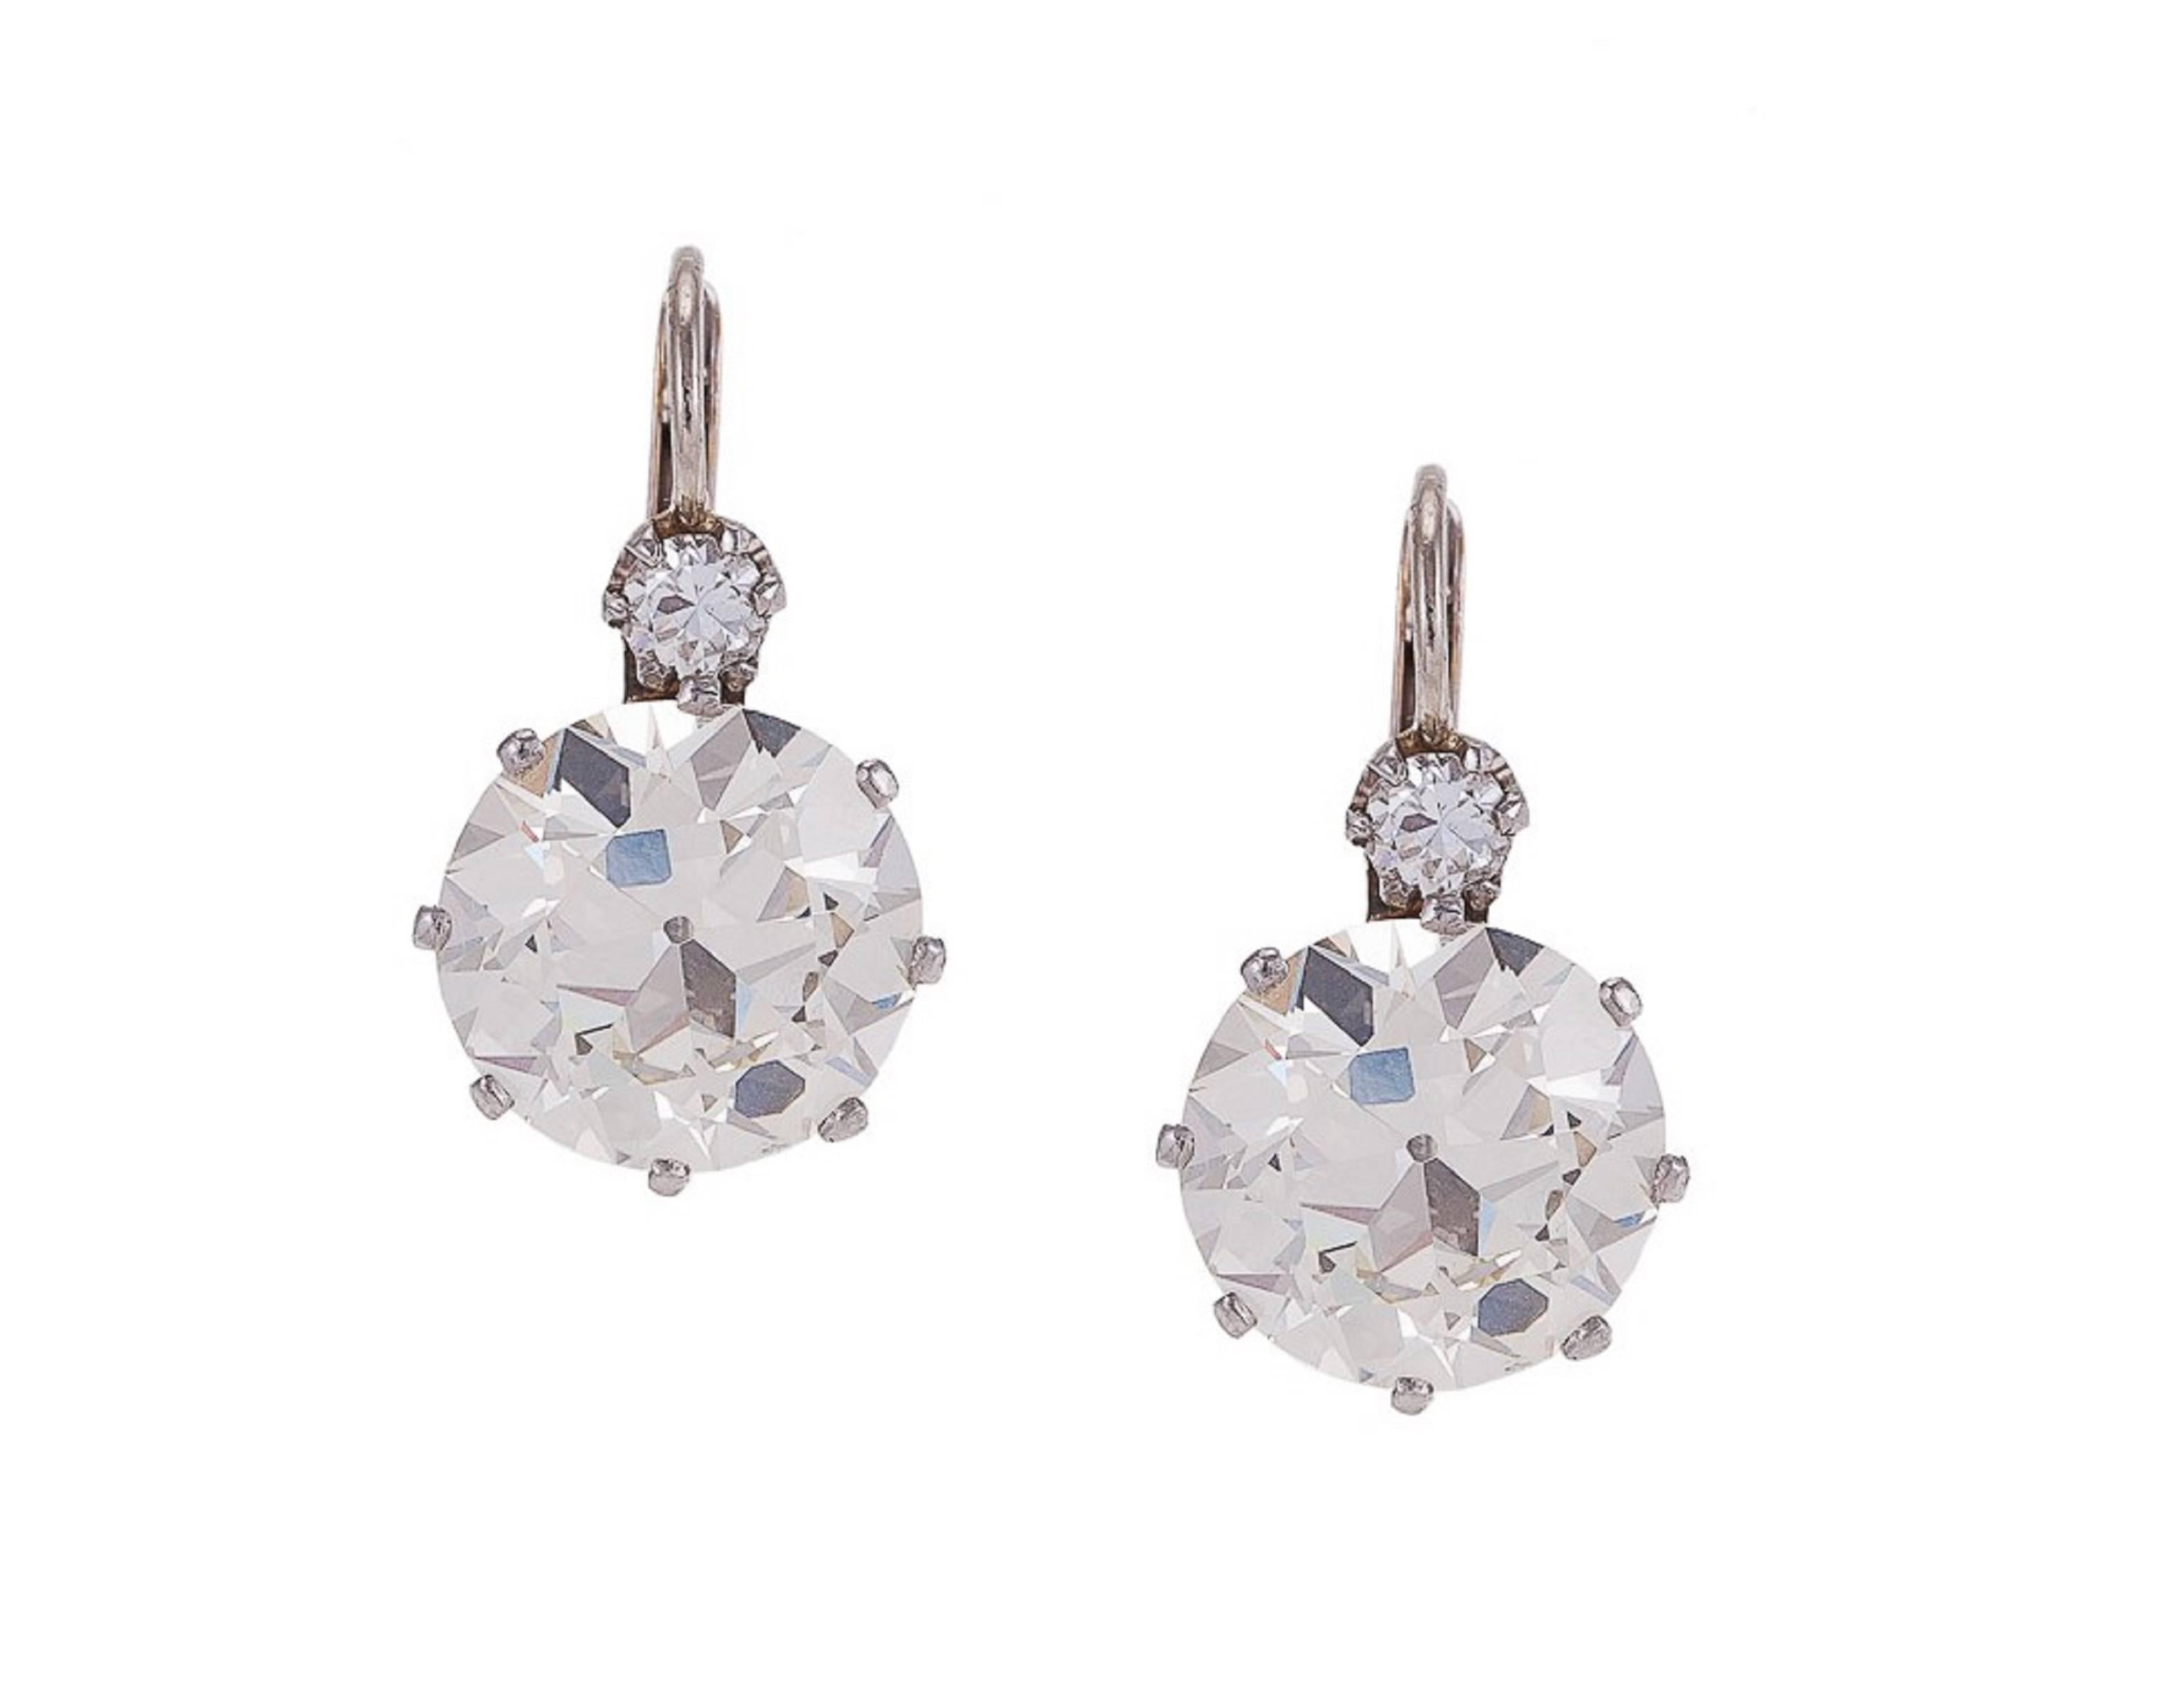 Diamonds circa 1930 in contemporary mountings. Each earring features 1 large old European-cut diamond, (perfectly matched set) weighed loose at 3.70 carats each, color: K-L (faces up 1 - 2 shades whiter) clarity: VS1, suspended from 1 small full-cut